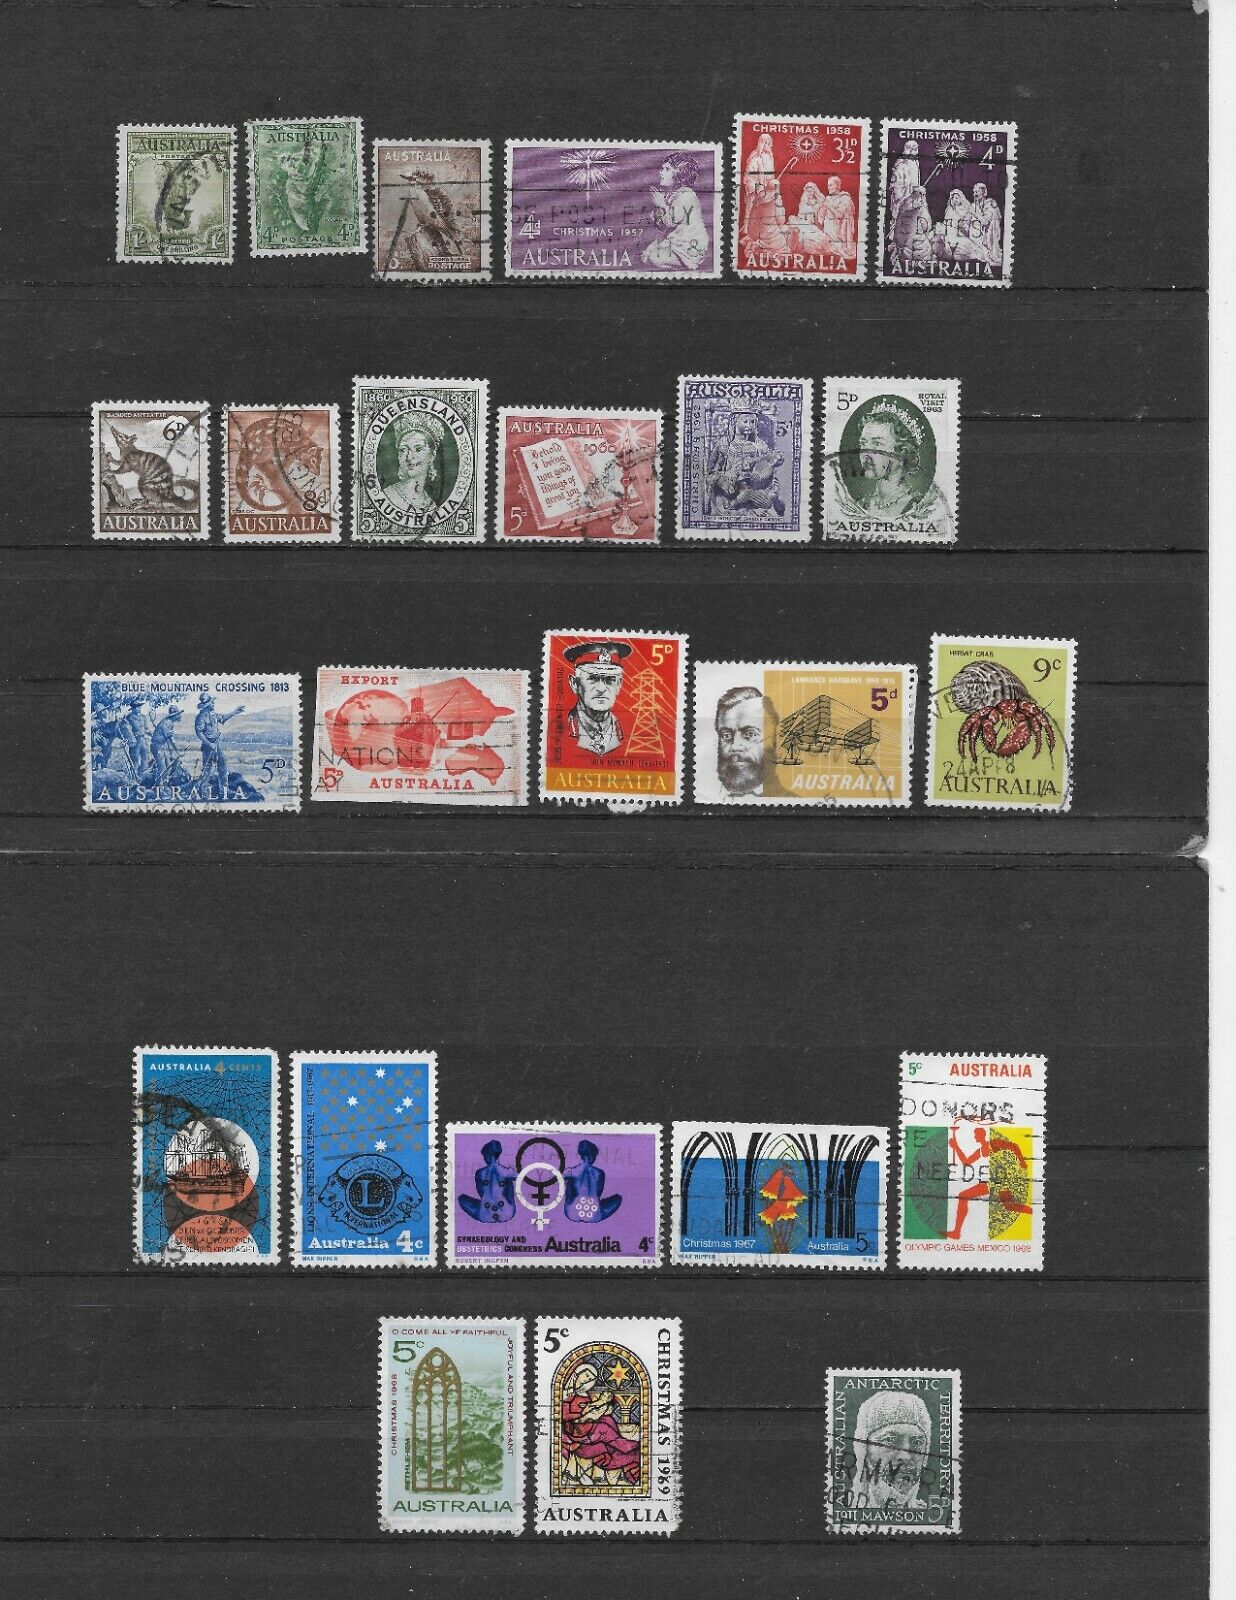 1932-69 AUSTRALIA Mixed Lot of 25 Used Issues, SC #141||466, scv=over $5  Без бренда